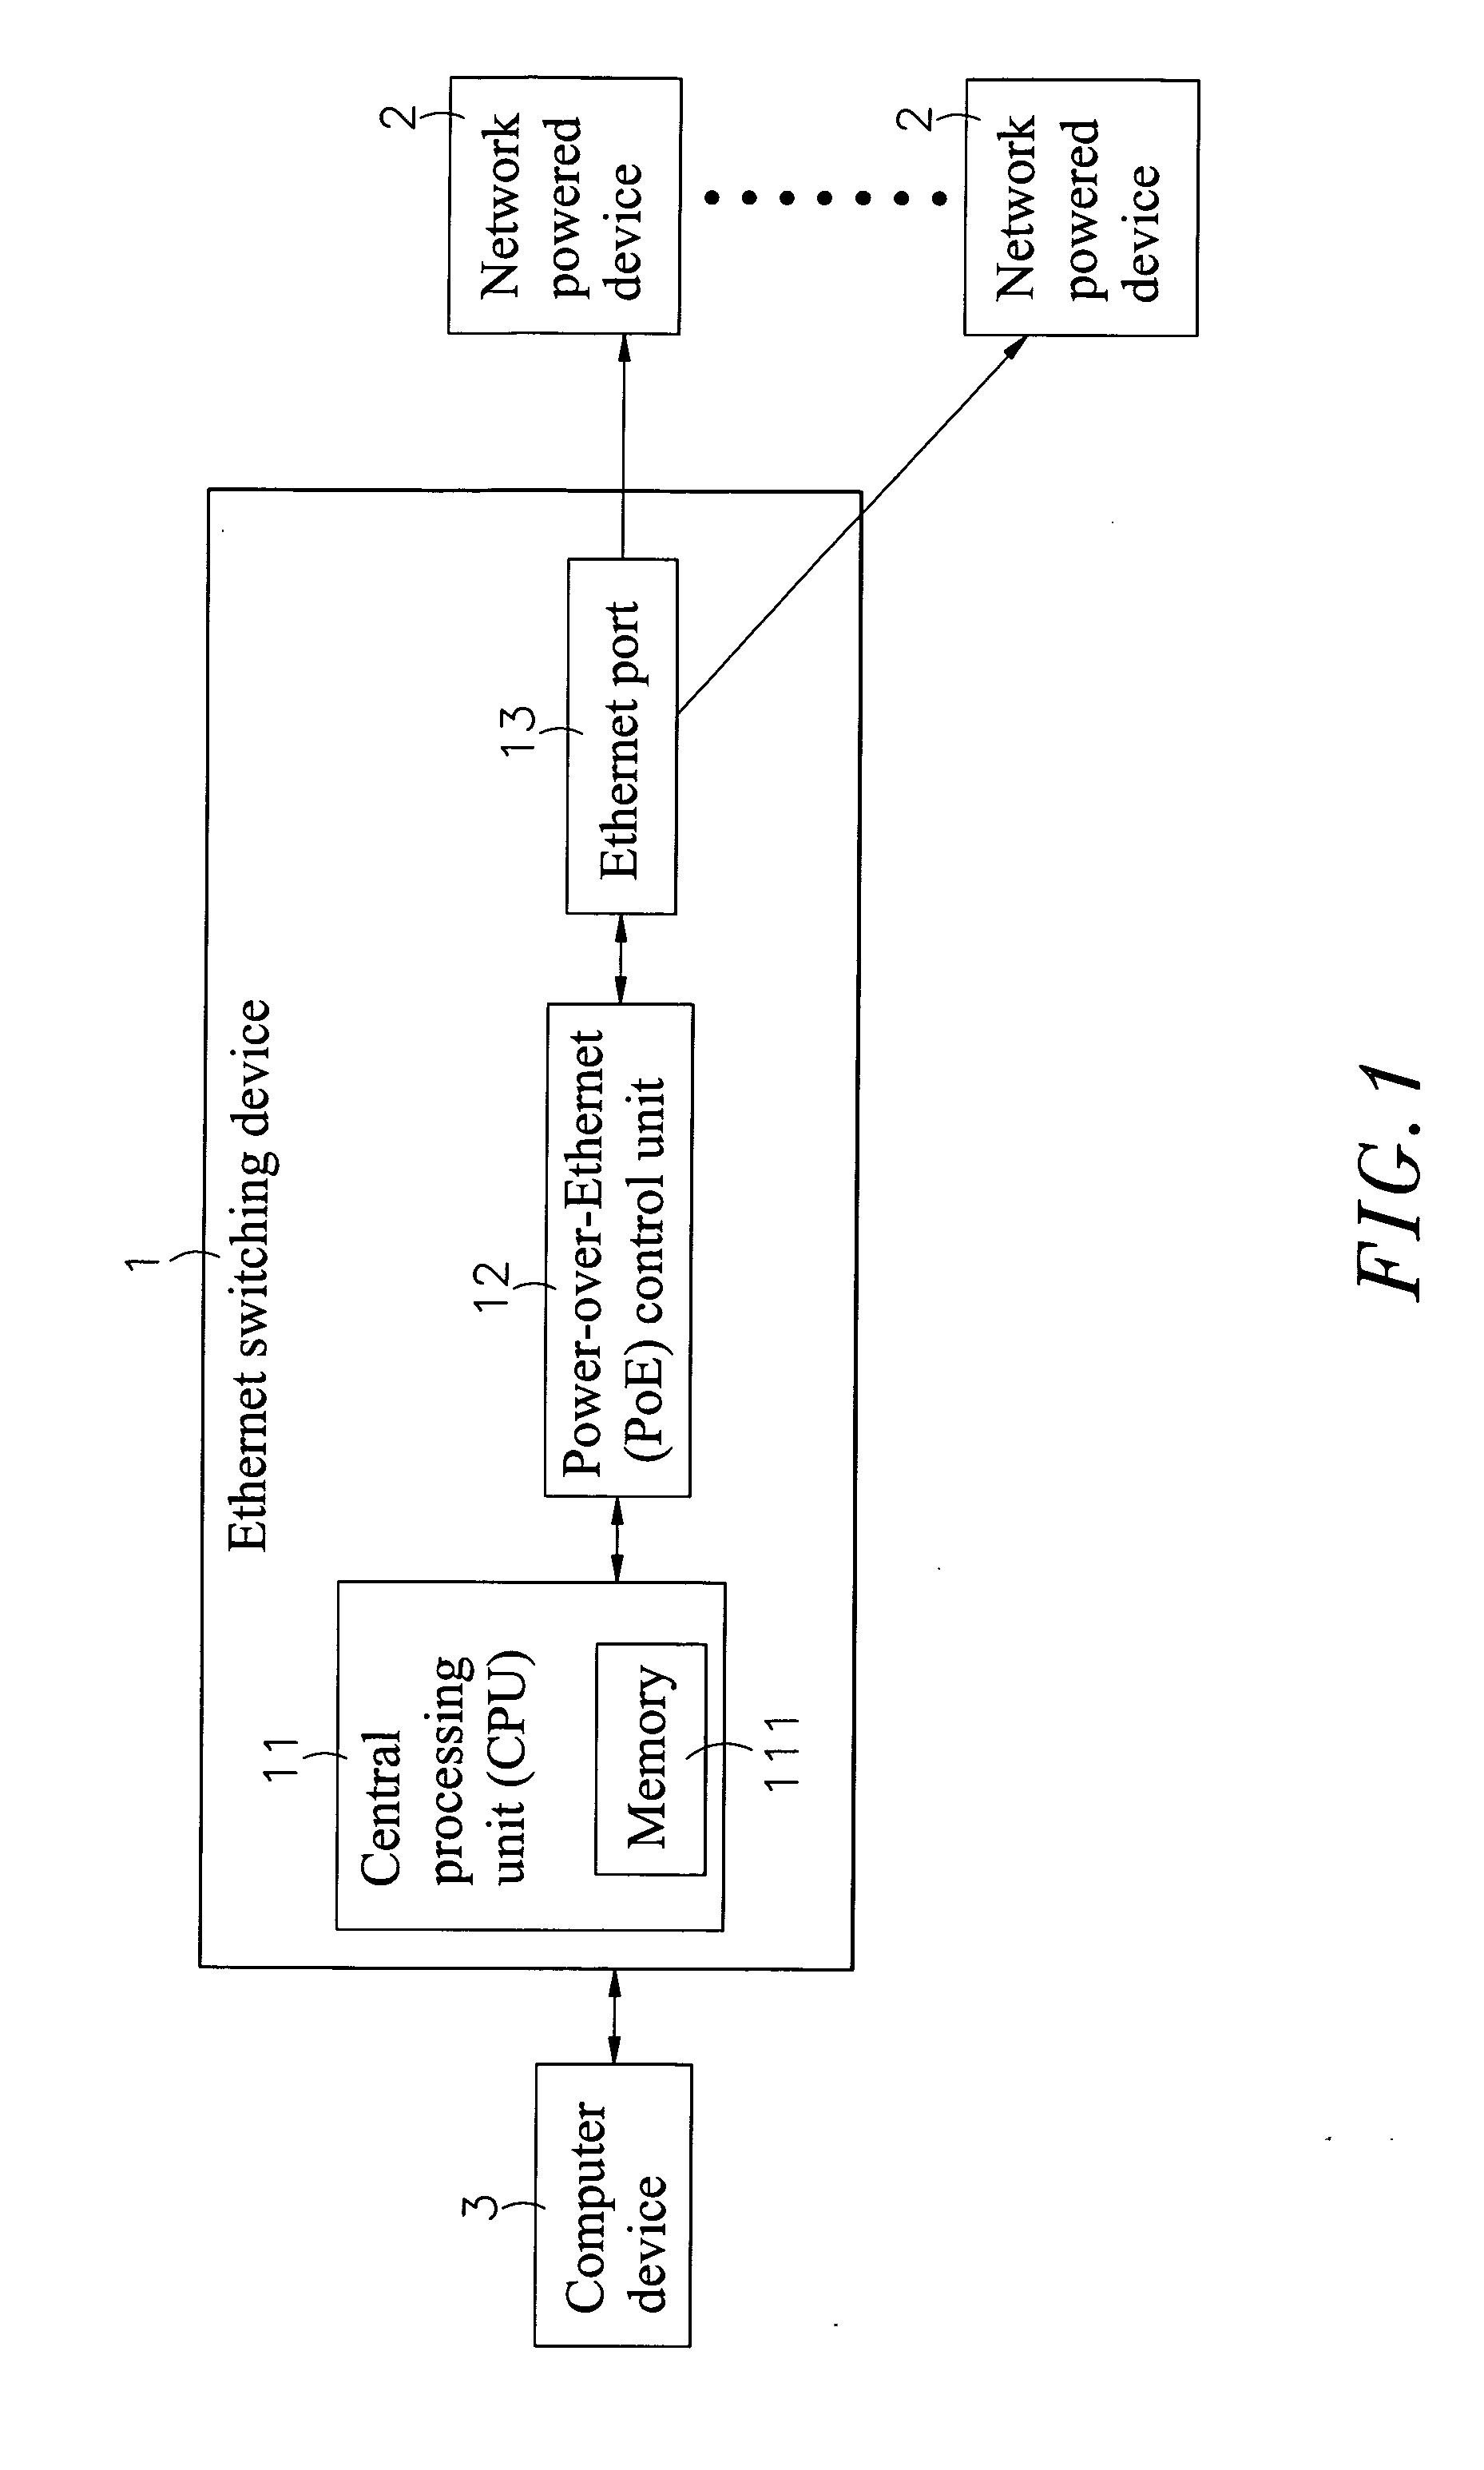 Method for power overload control in a network